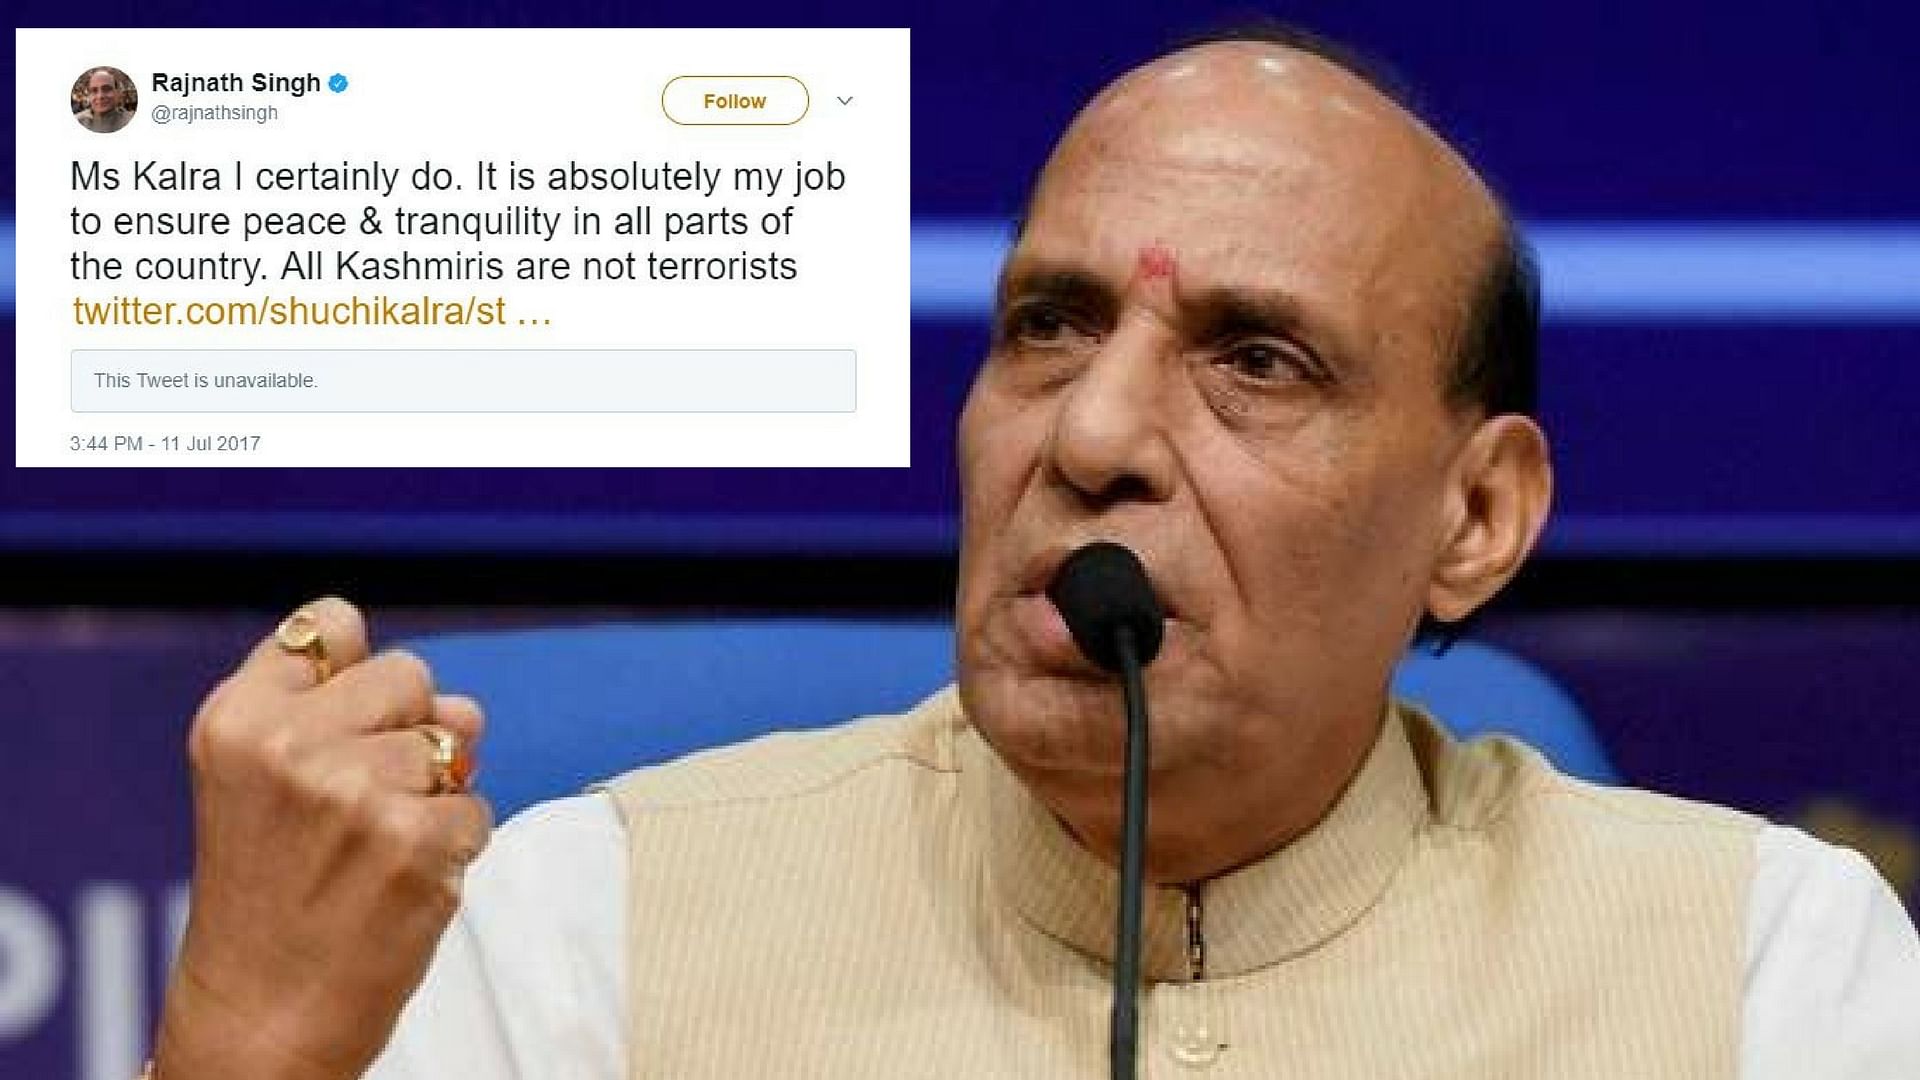 

Rajnath Singh had earlier condemned the attack and said that the spirit of Kashmiriyat was very much alive.